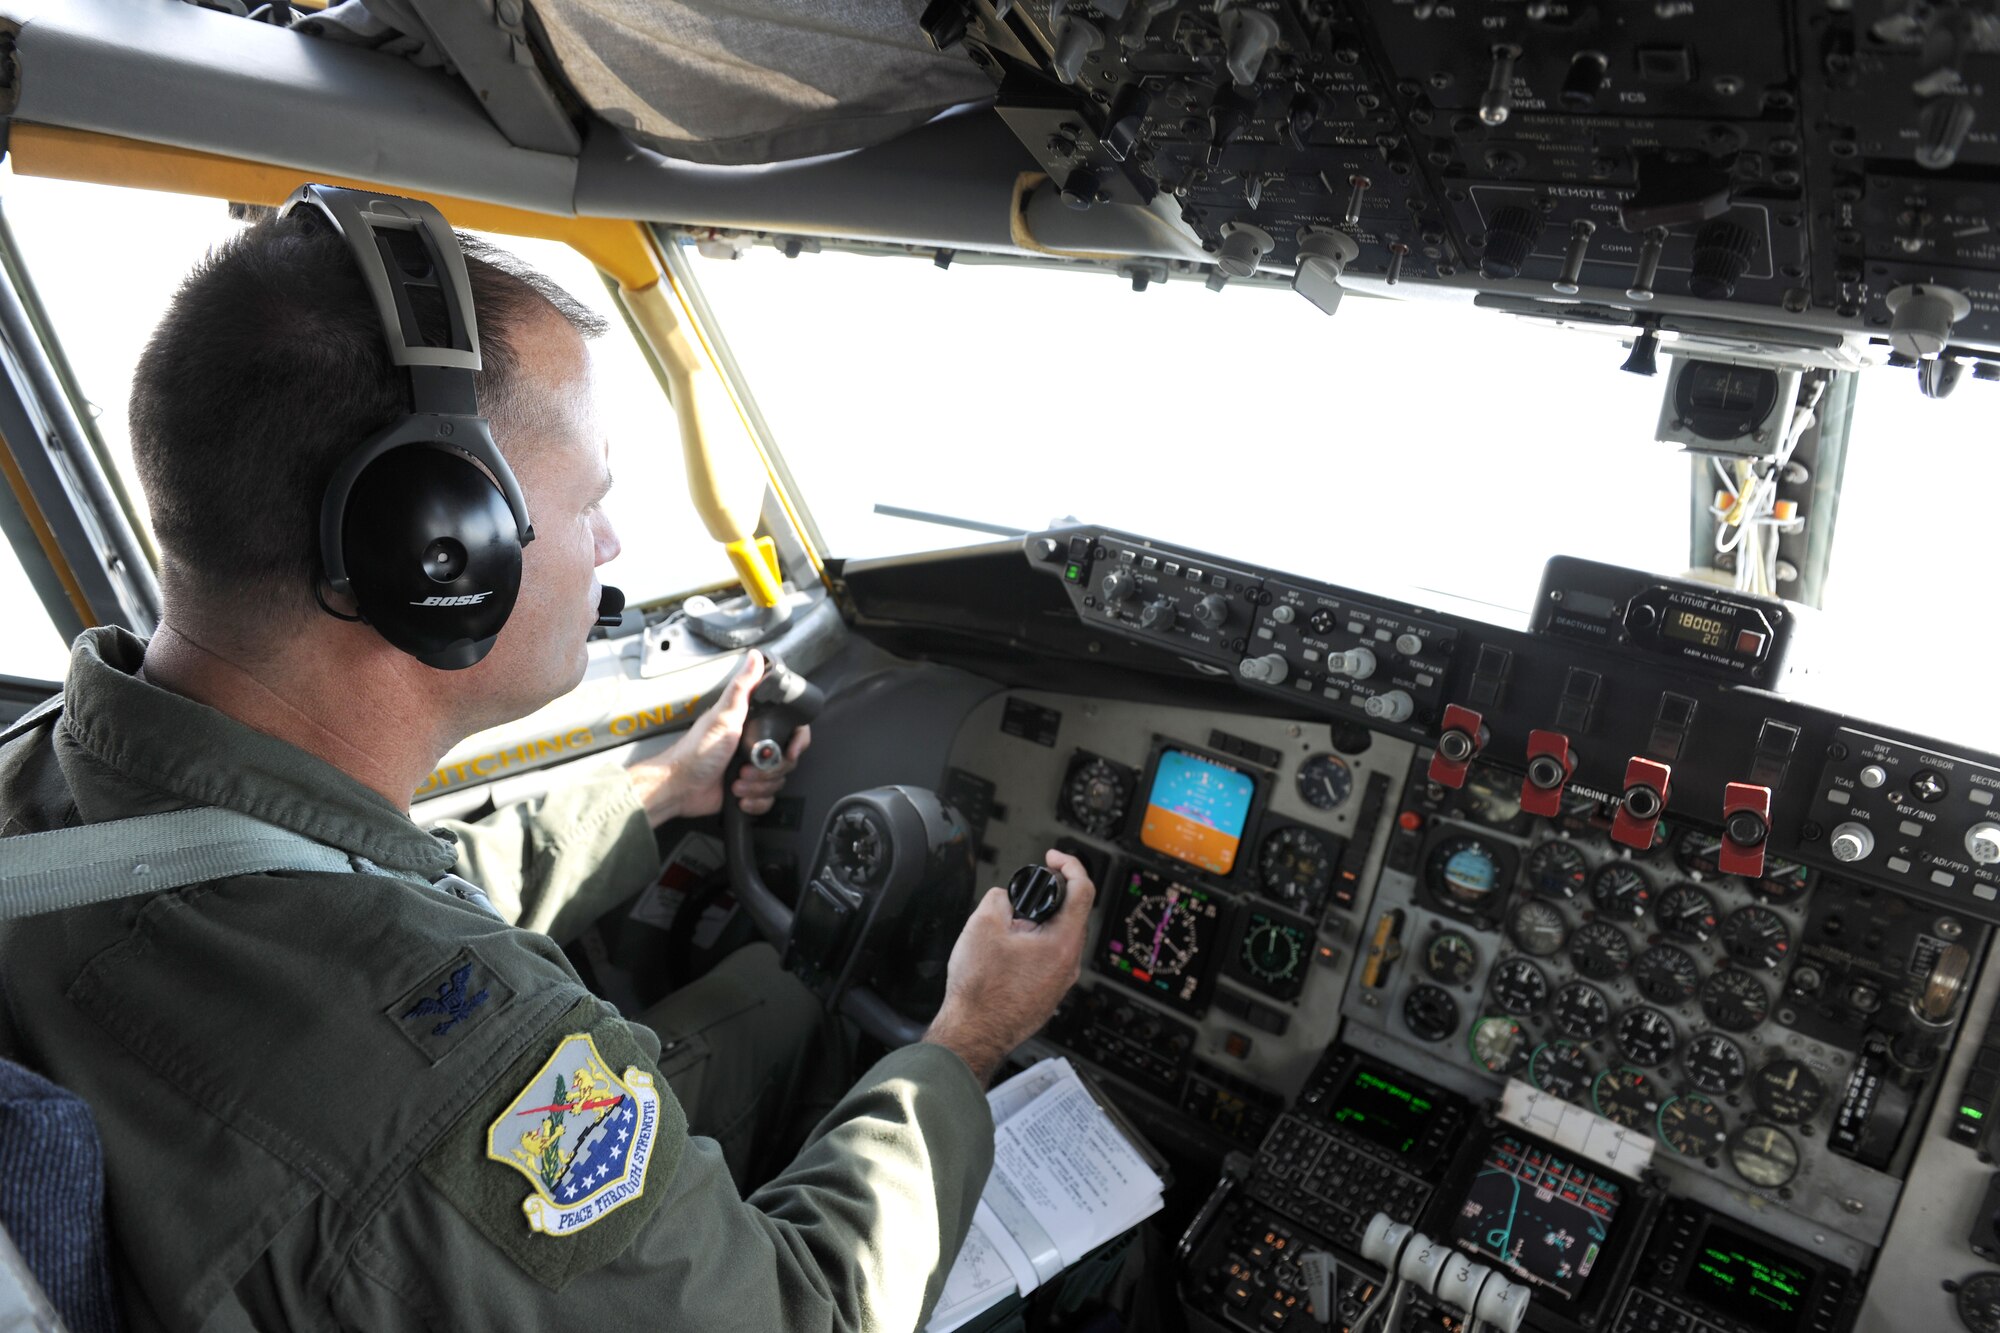 U.S. Air Force Col. Kenneth T. Bibb, Jr., 100th Air Refueling Wing commander, pilots a KC-135 Stratotanker to Moron Air Base, Spain, Aug. 27, 2014, from RAF Mildenhall, England. Bibb is qualified as a command pilot with more than 4,500 flight hours and tries to fly whenever his schedule as a wing commander allows. (U.S. Air Force photo/Senior Airman Kate Maurer/Released)